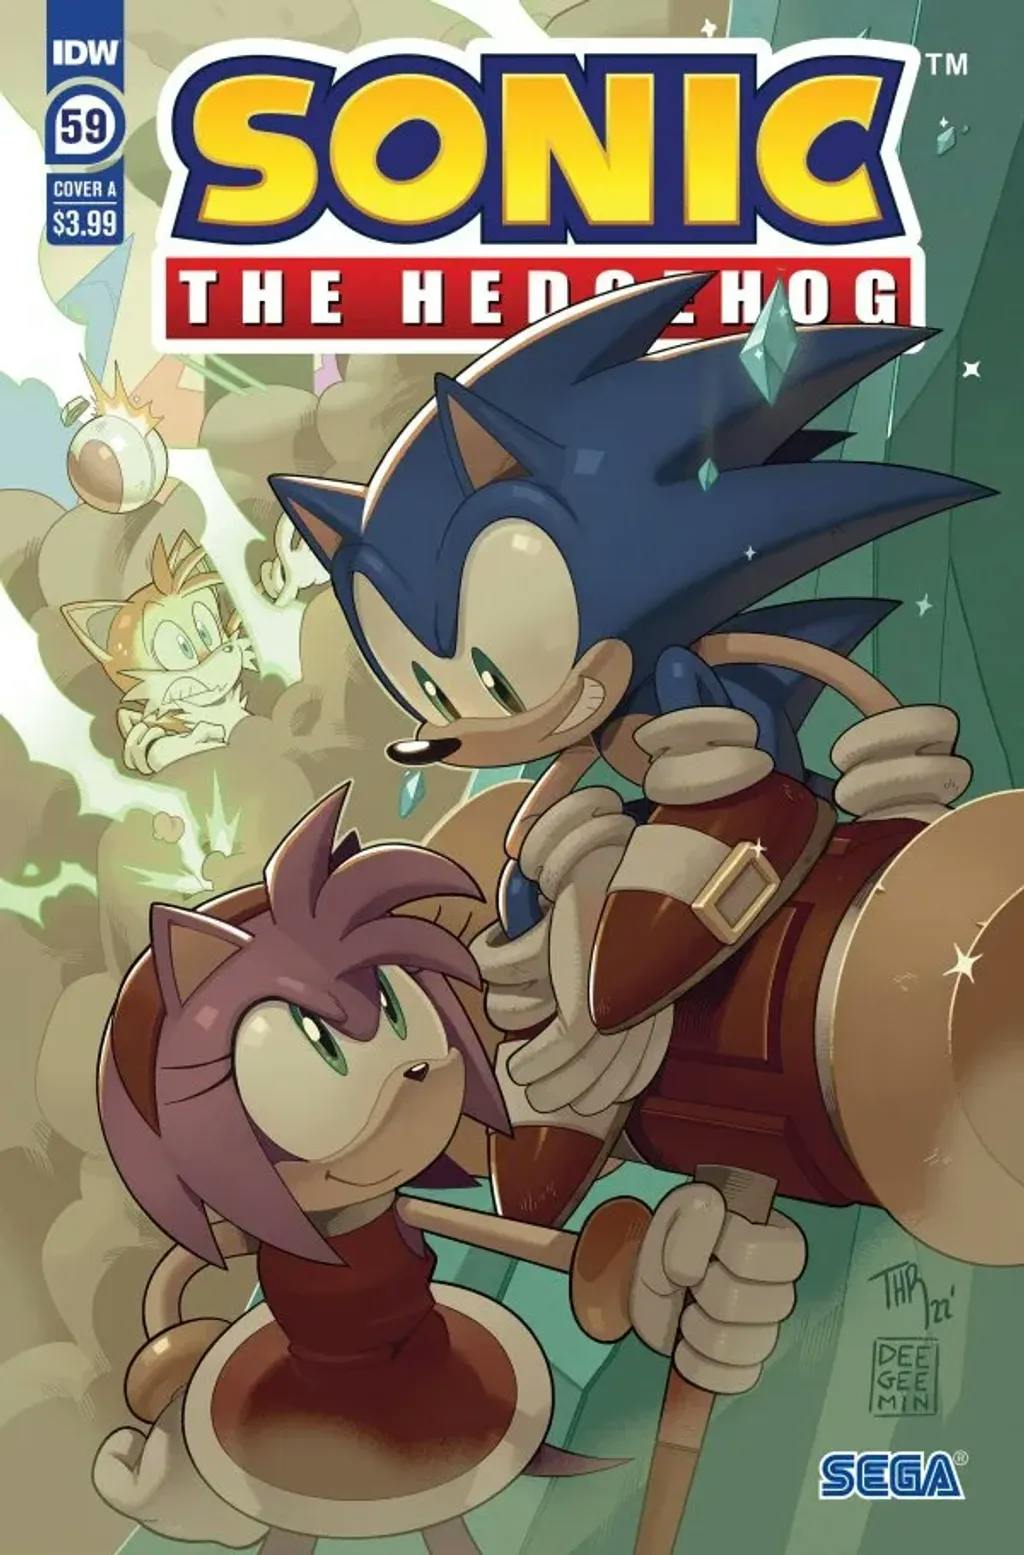 Sonic the Hedgehog #59 By Evan Stanley and Adam Bryce Thomas